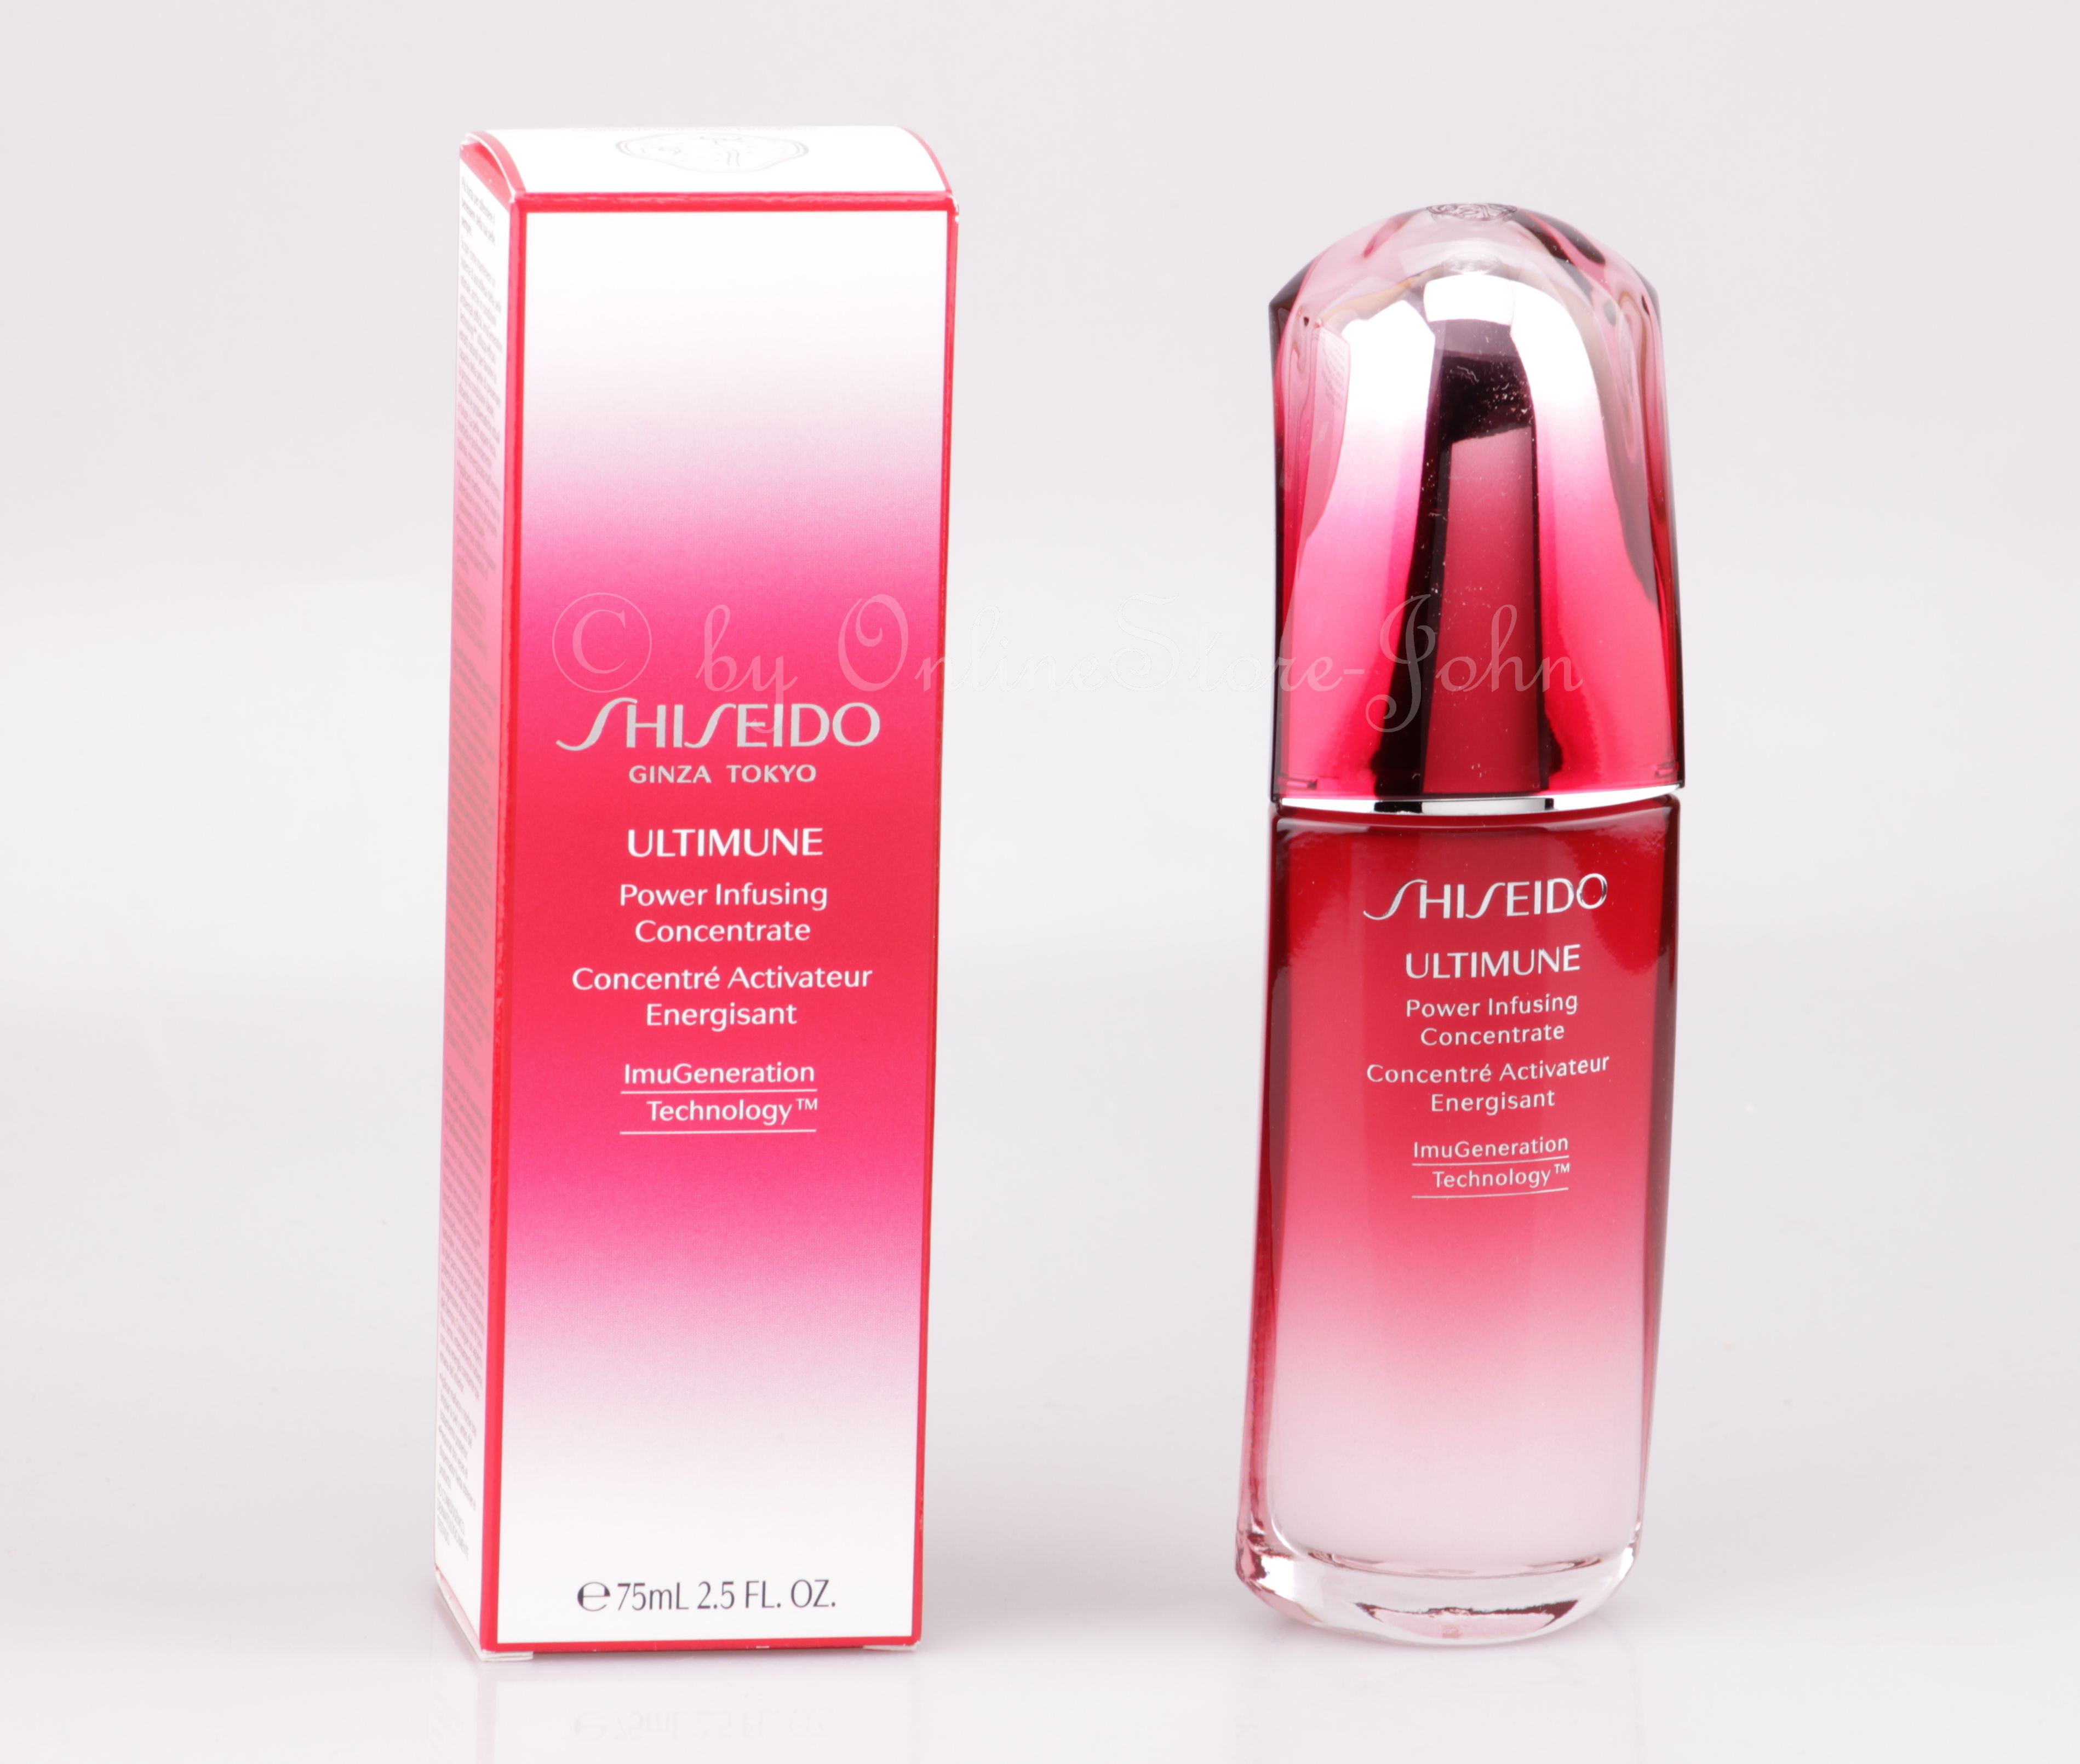 Shiseido concentrate. Ultimune концентрат шисейдо. Ultimune концентрат шисейдо Power infusing. Shiseido Ultimate Power infusing. Ultimune Ginza шисейдо 30 мл.